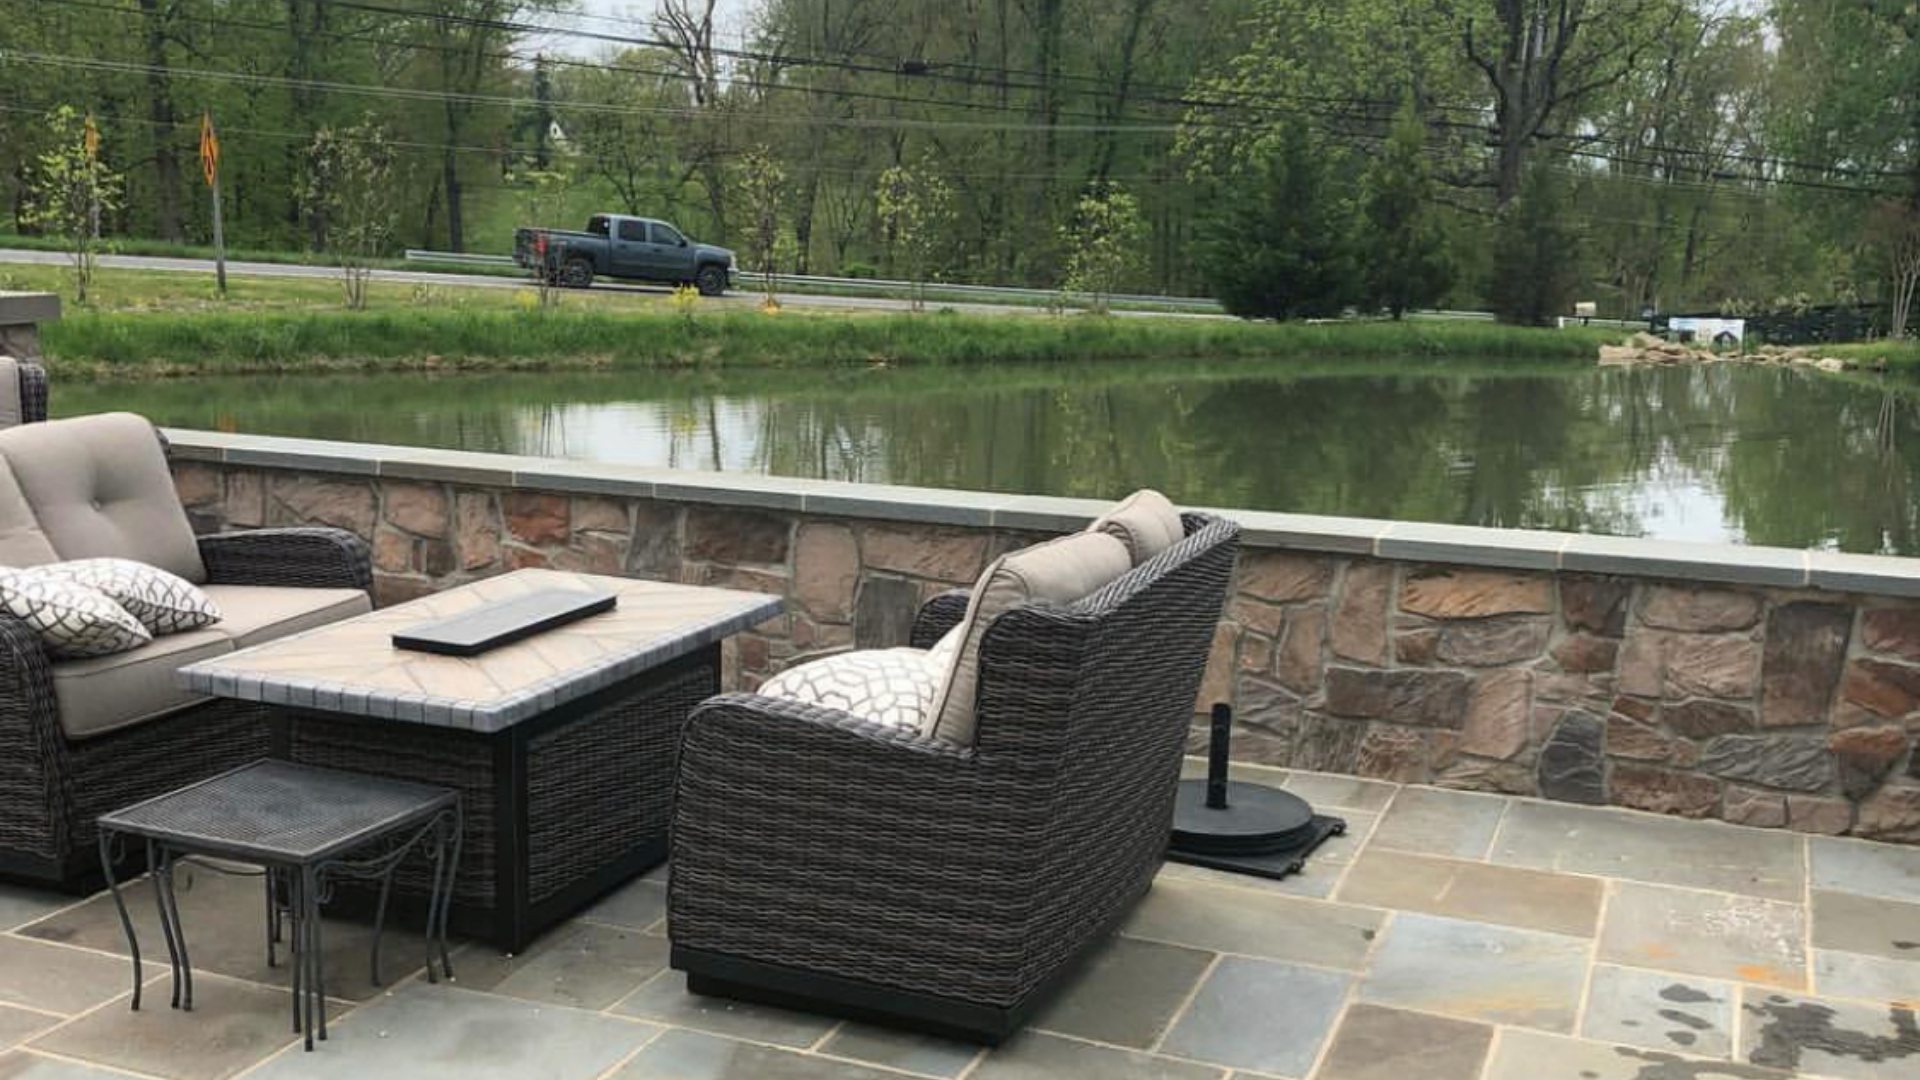 Seating wall with stone installed by patio in Leesburg, VA.